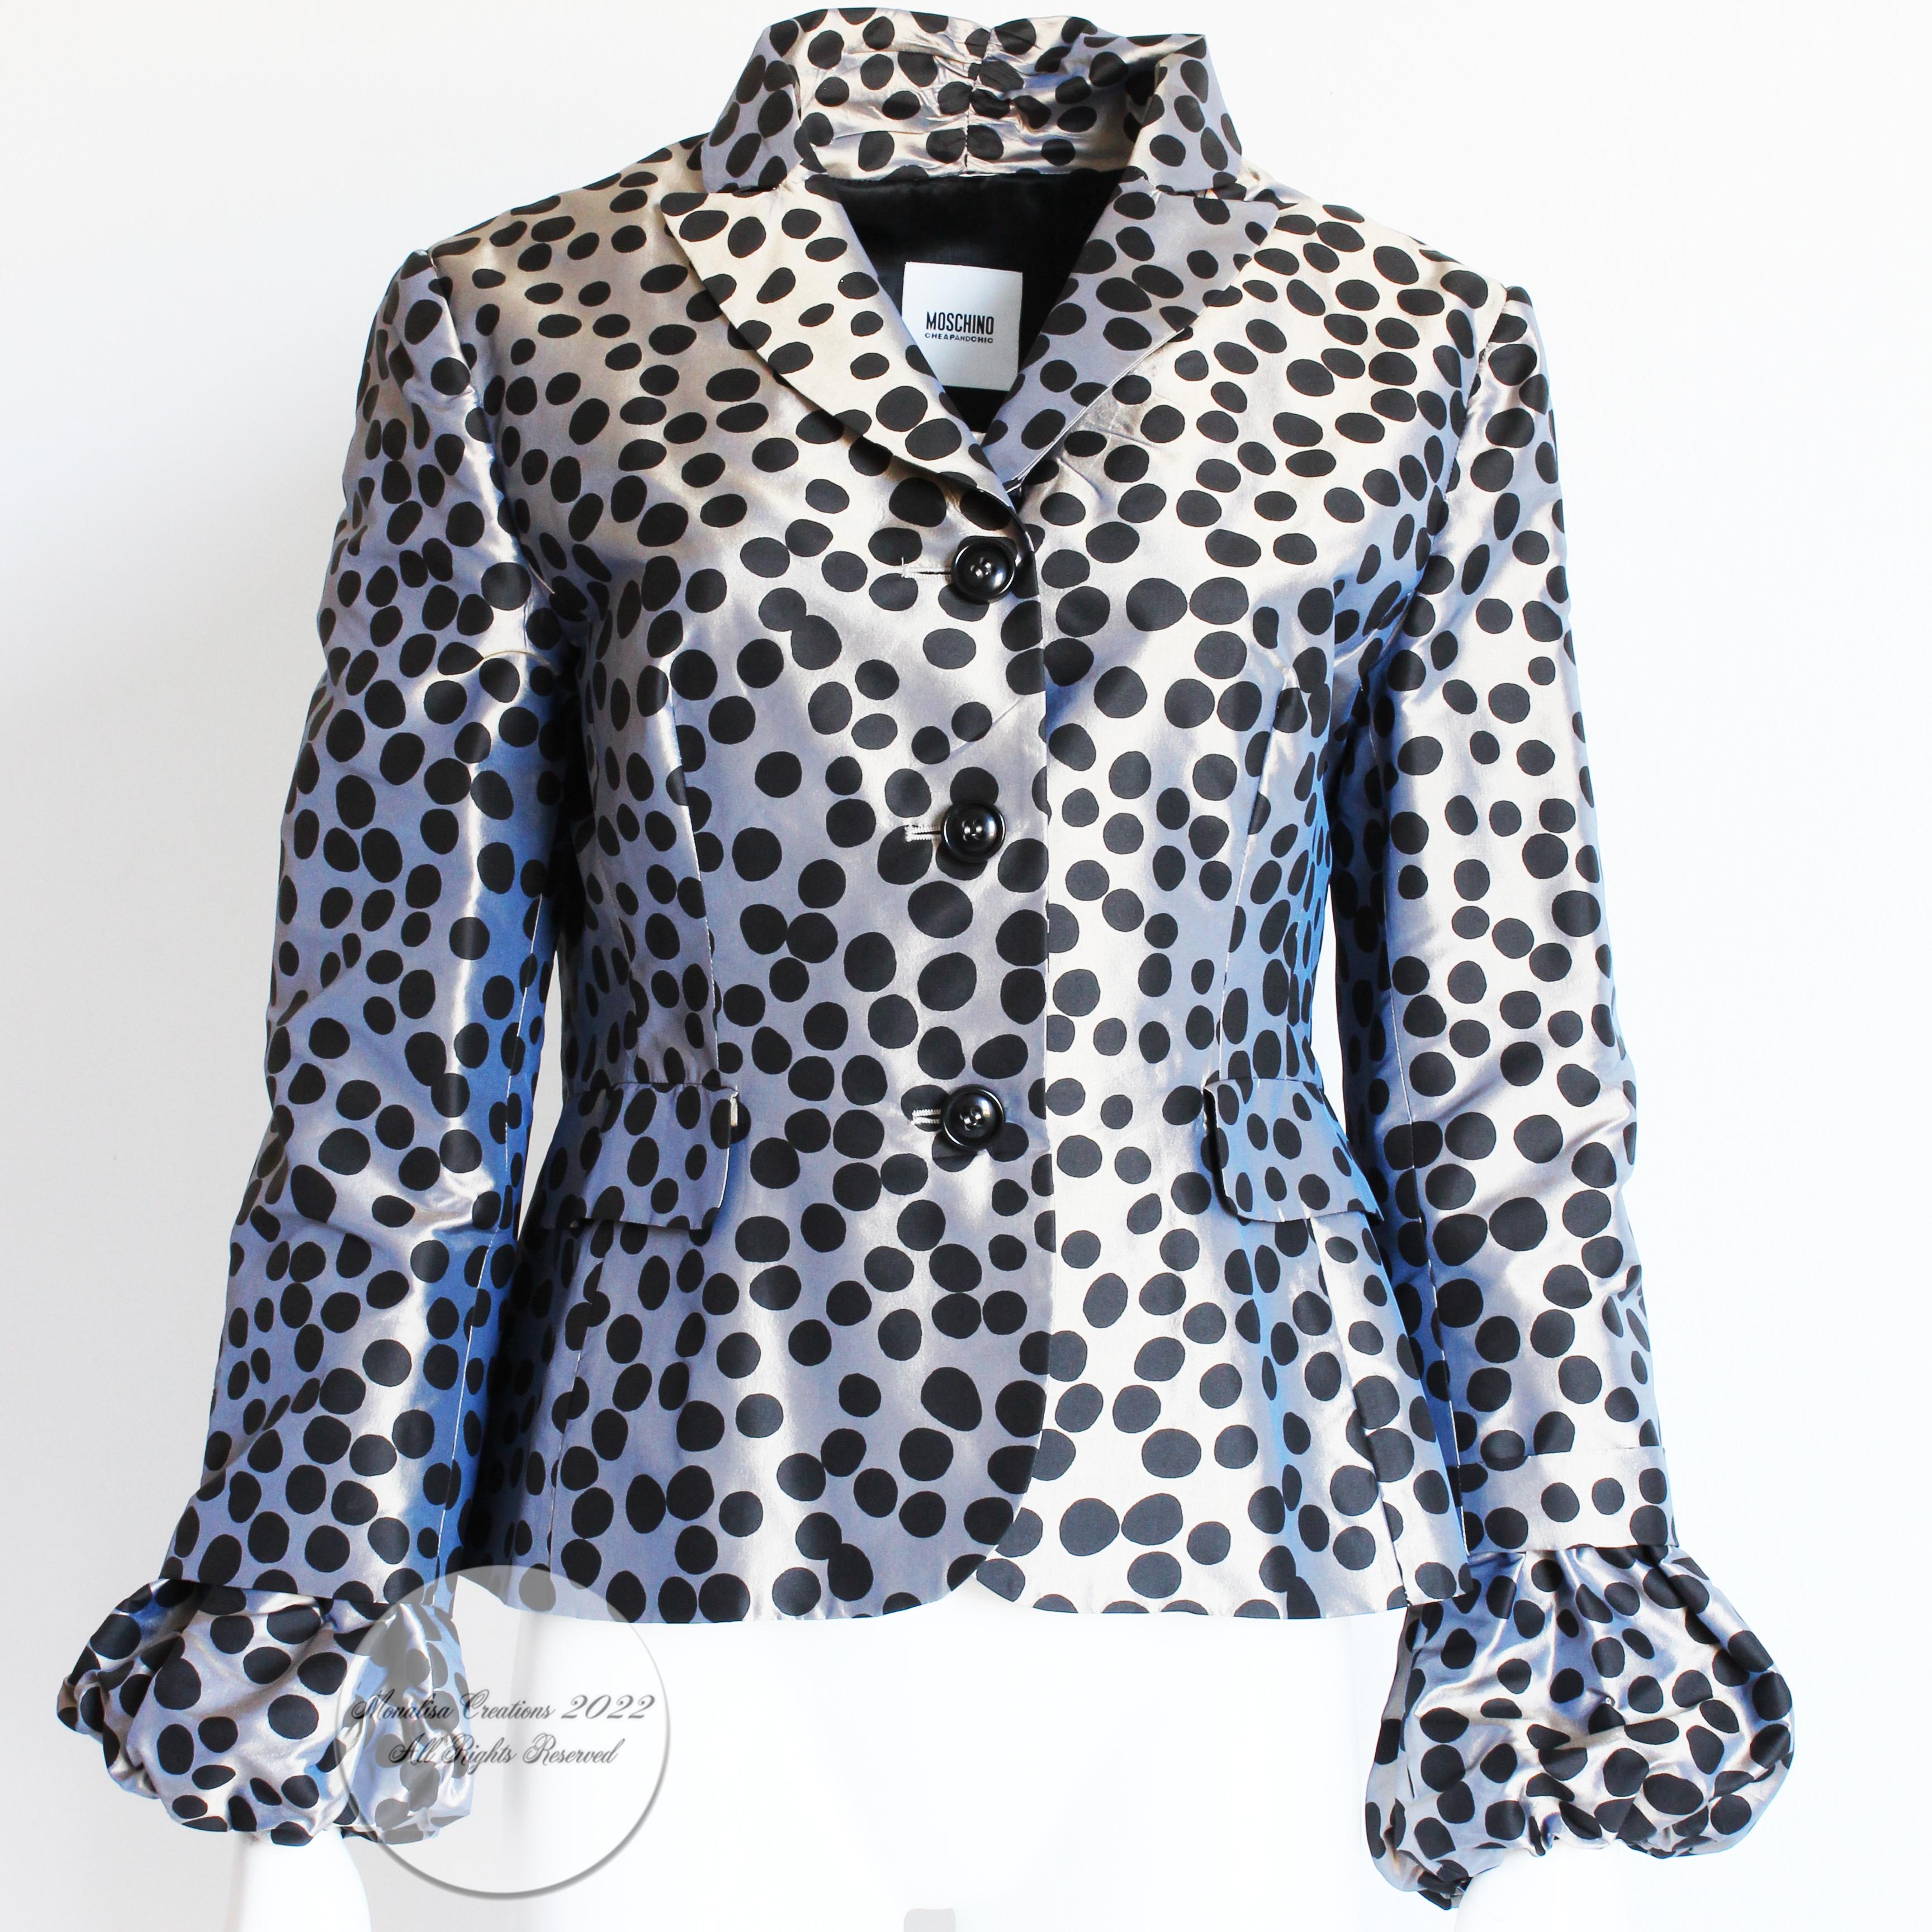 Moschino Jacket Gunmetal Silk with Polka Dots Puff Sleeves Cheap and Chic US 12 5